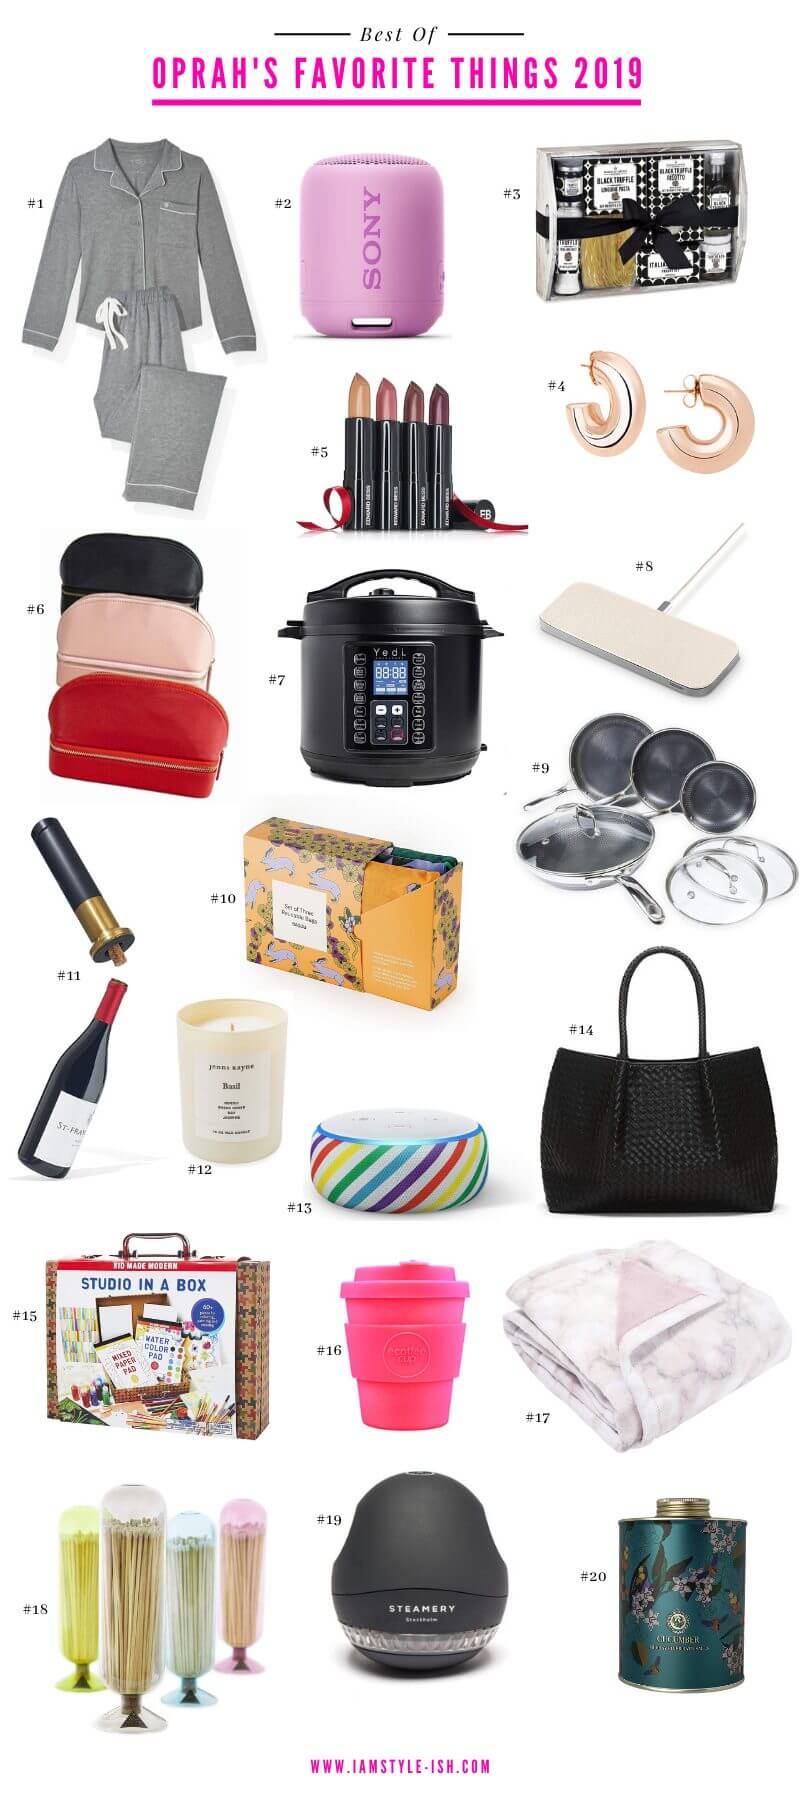 Best of Oprah's Favorite Things 2019, oprah's favorite things list 2019, amazon holiday gift ideas, gifts from amazon, gift ideas, best gift ideas 2019, best holiday gift ideas, holiday gift ideas, gifts for her, gifts for him, best technology gifts, best cooking gifts, best beauty gifts, gift ideas, kids gifts, last minute gifts